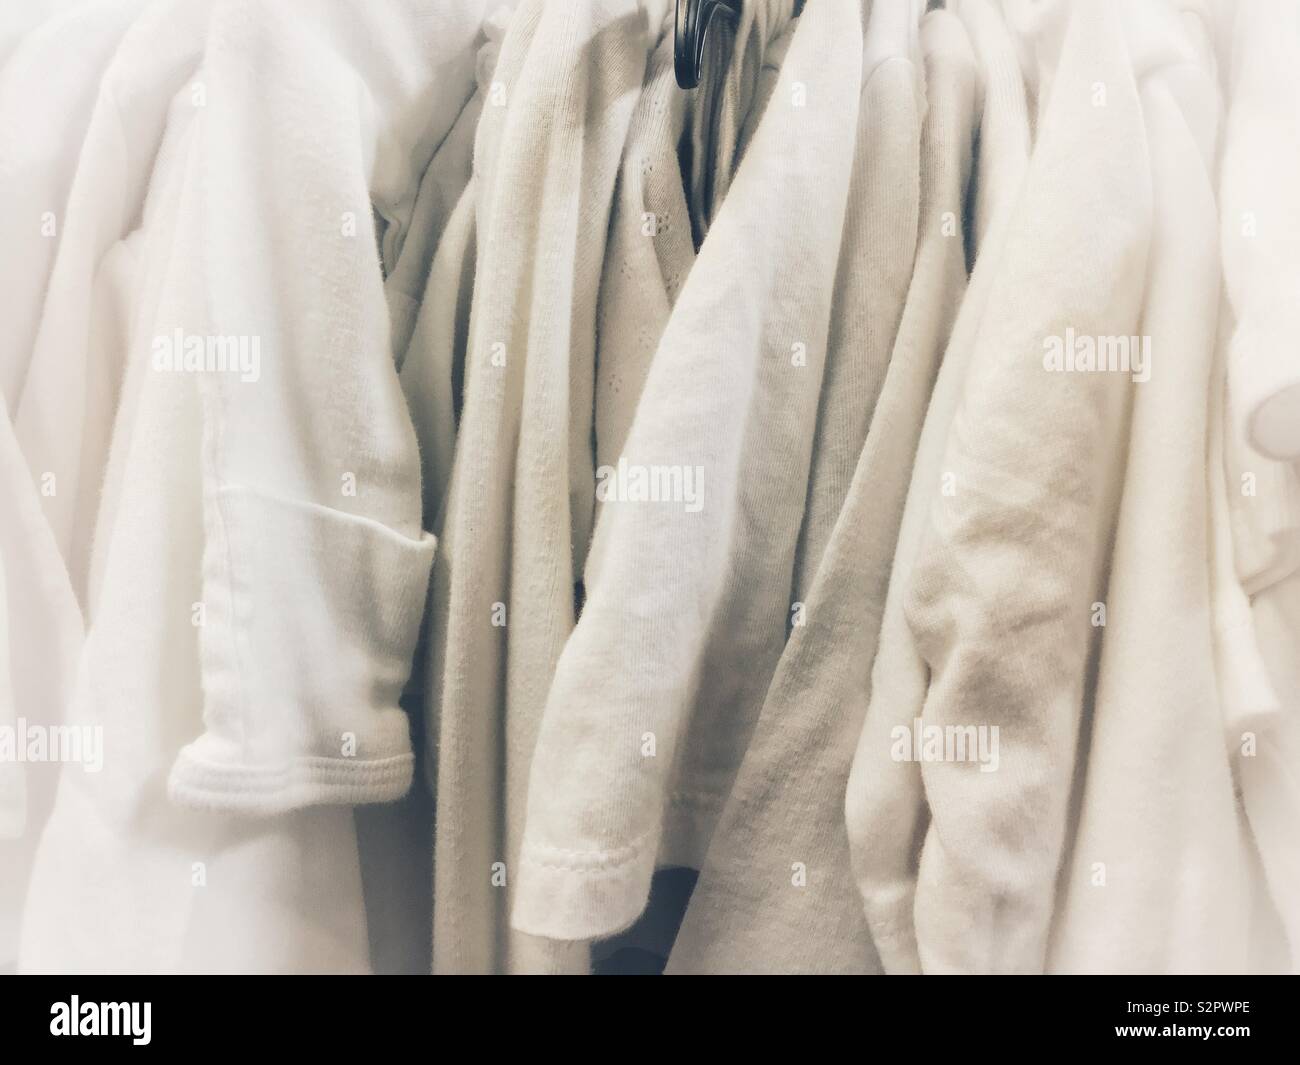 Bunch of white cotton clothes hanging on a rod in soft focus. Stock Photo